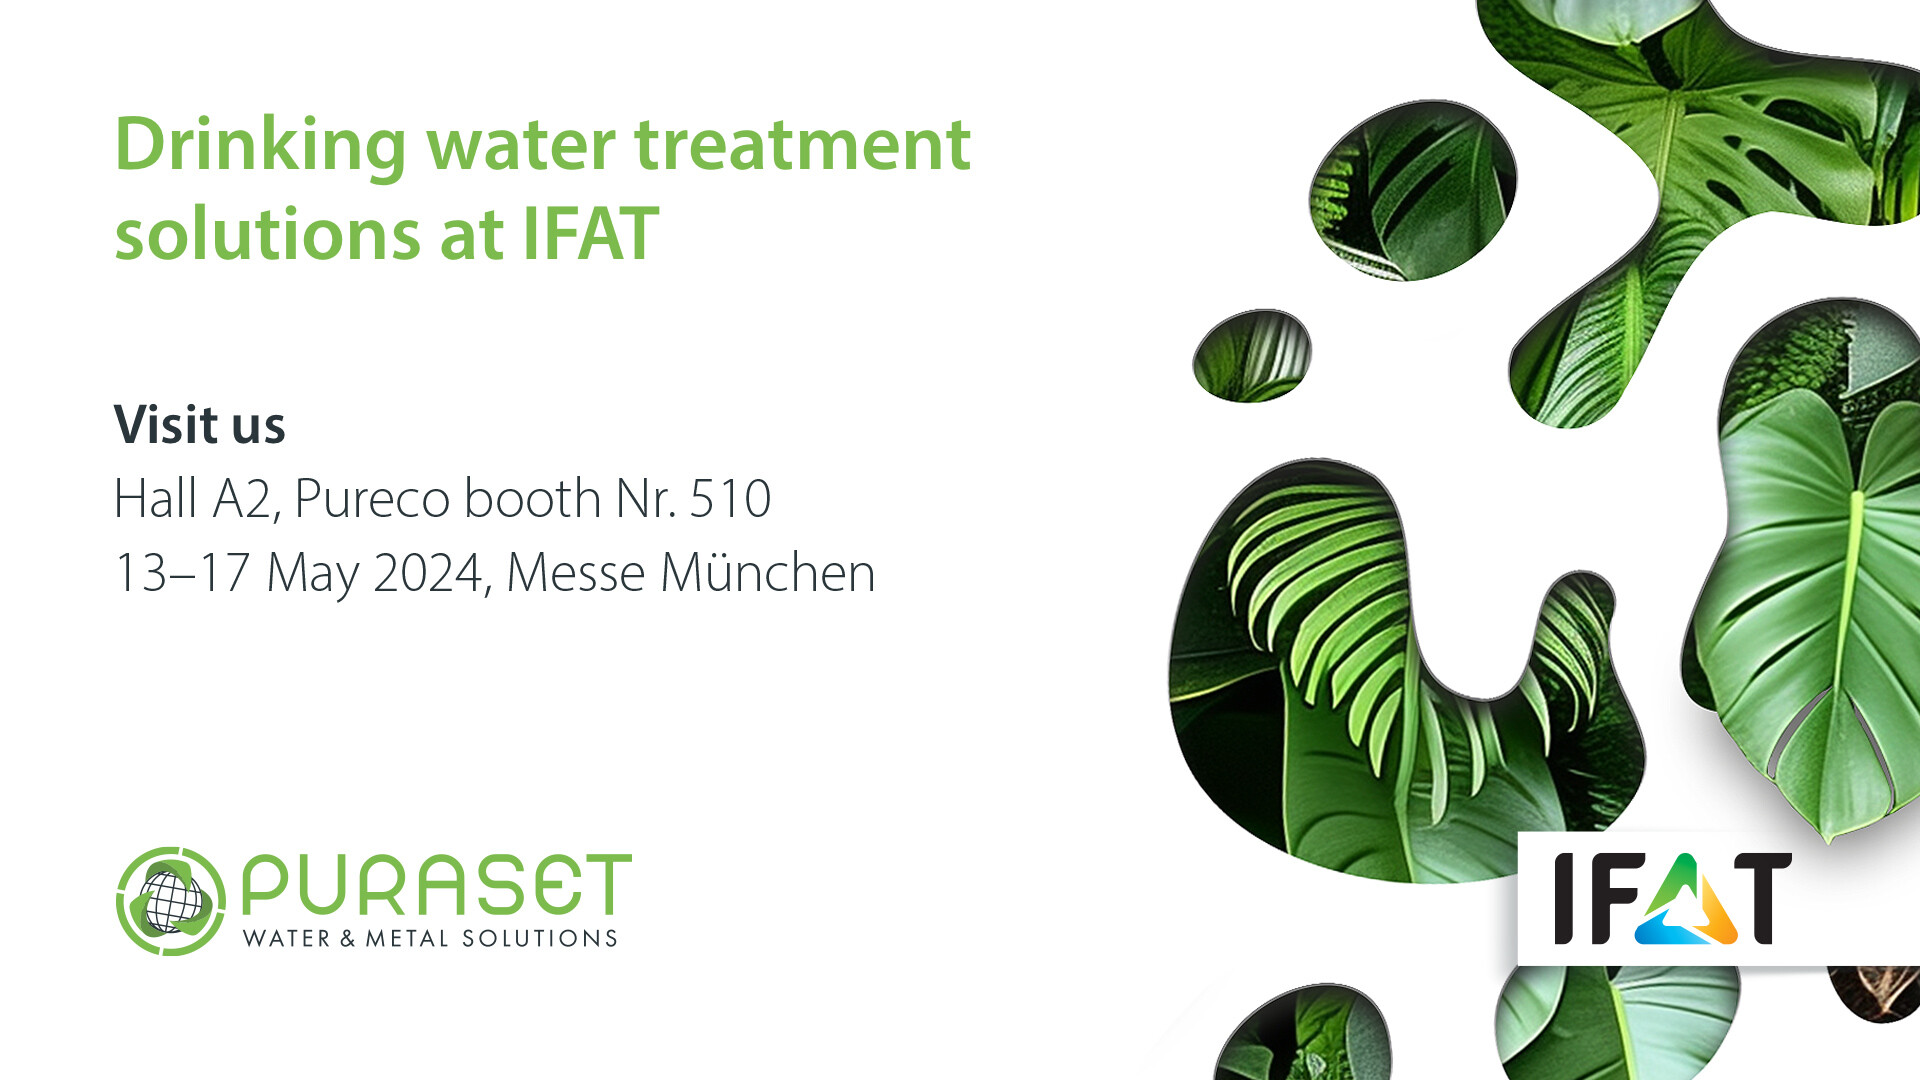 We will exhibit at IFAT